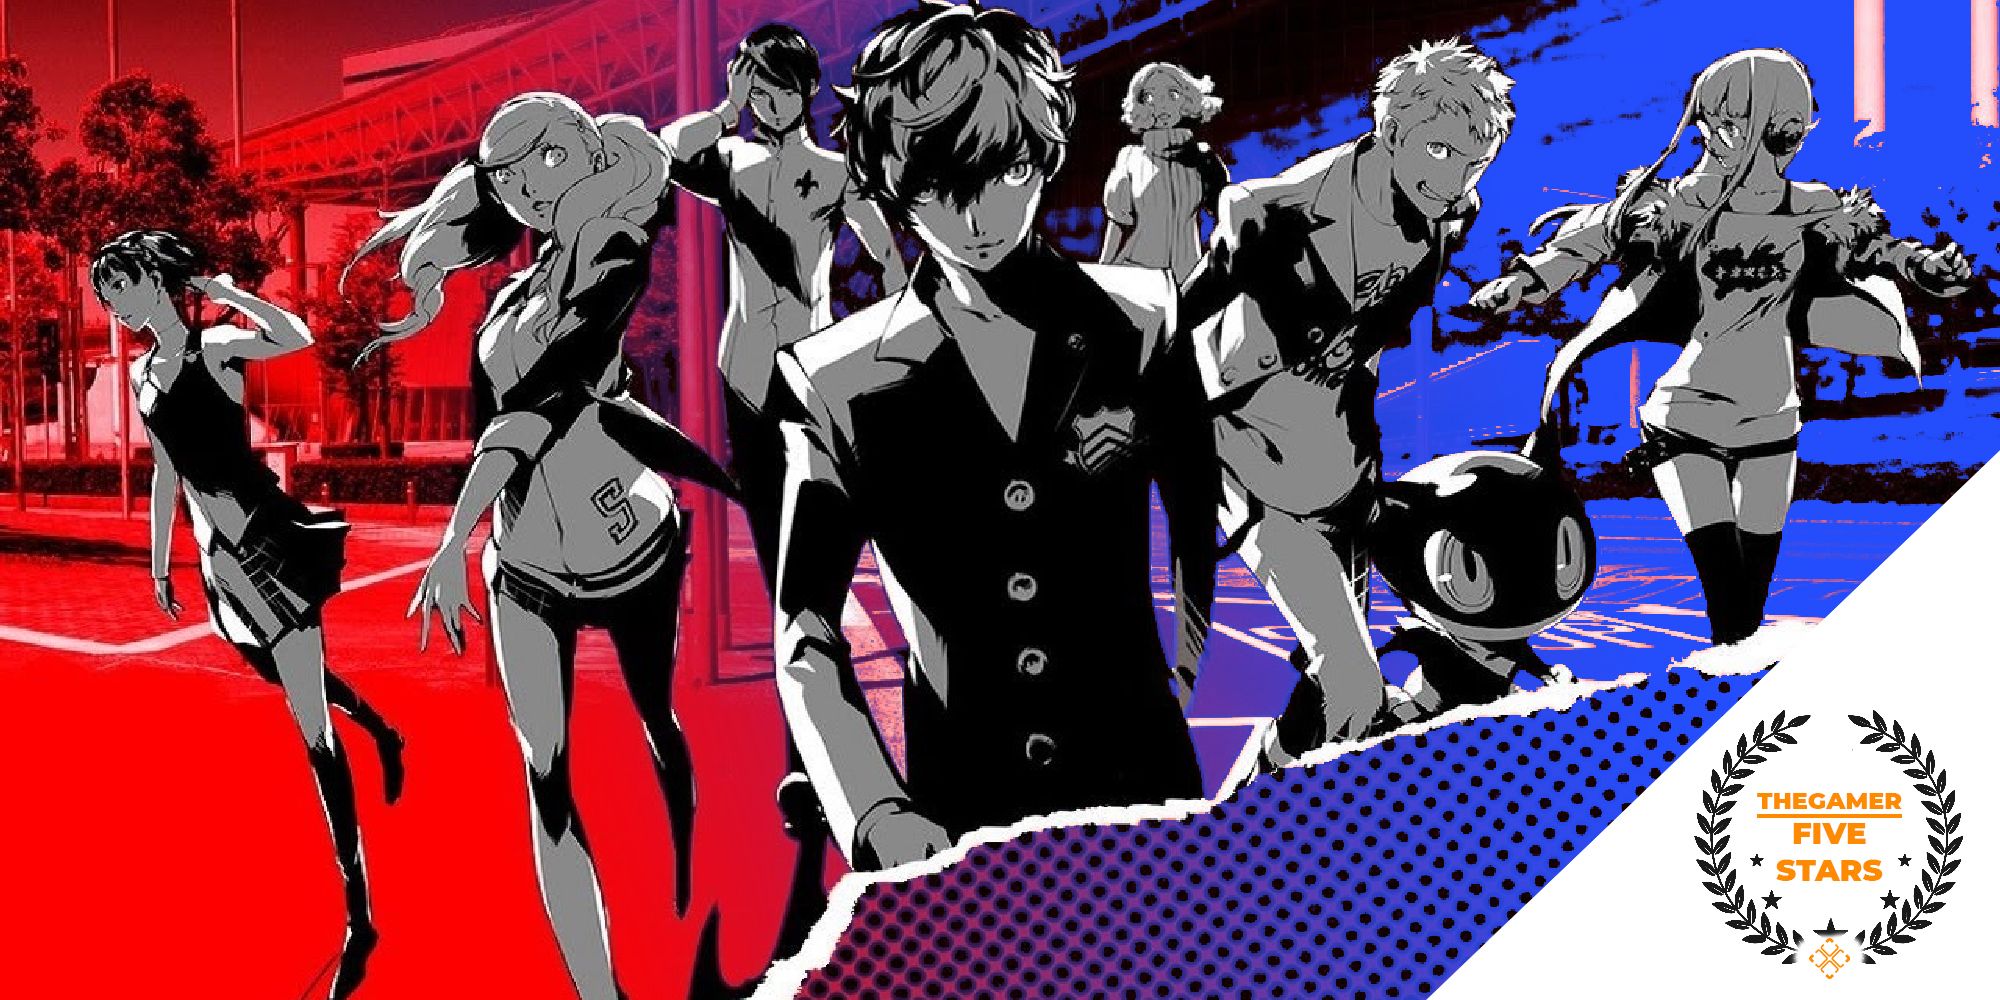 Persona 5 Review - Taking My Heart Once Again